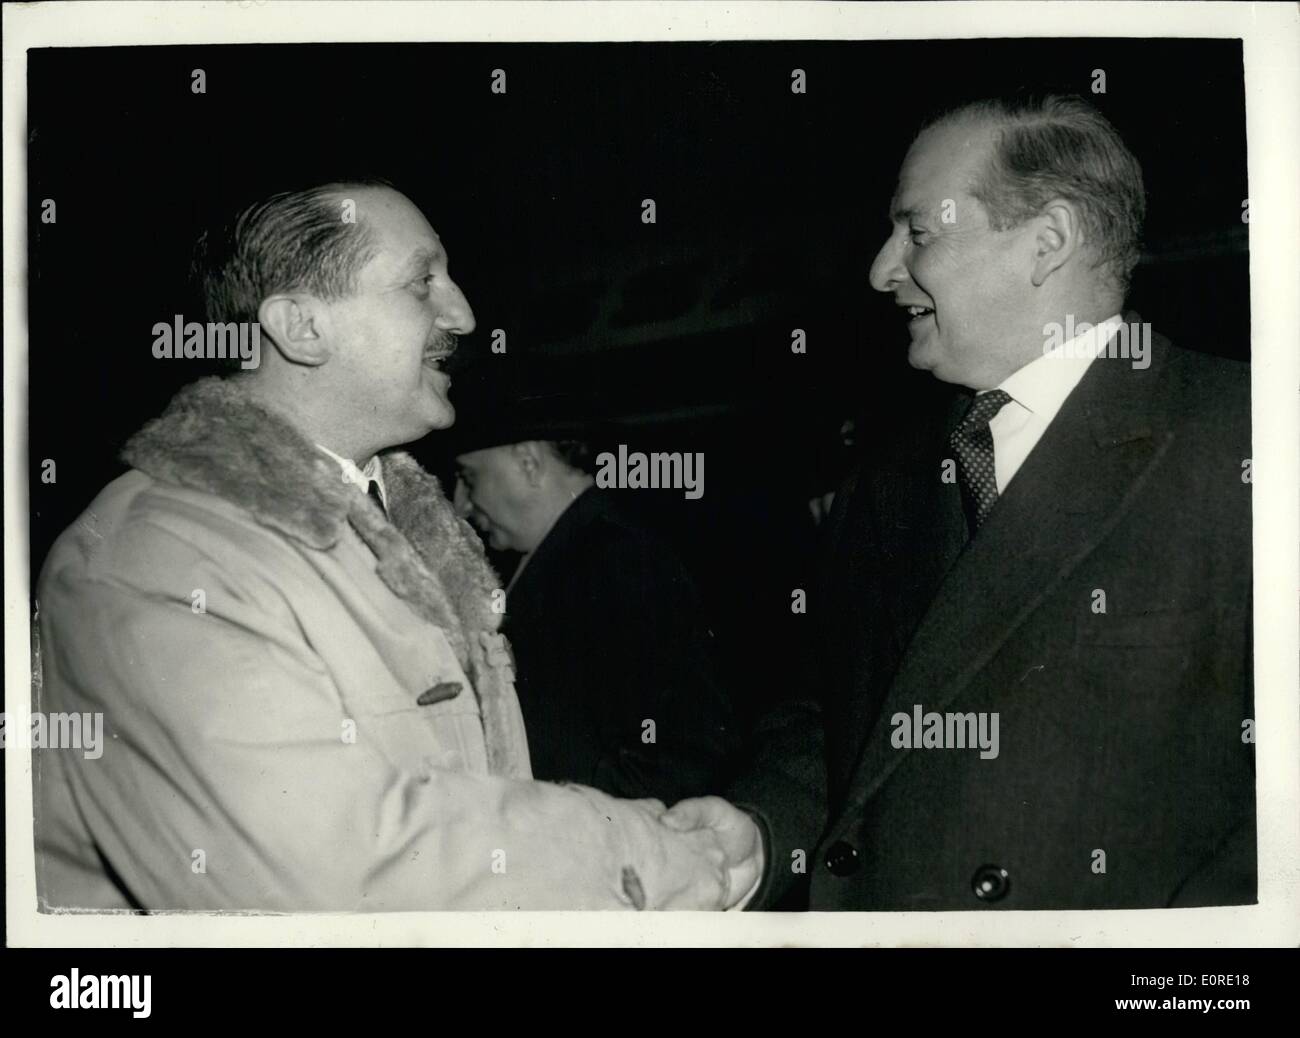 Feb. 02, 1959 - GREEK FOREIGN MINISTER ARRIVES - CYPRUS PLAN REPORTED?. The Greek Foreign Minister Mr. Averoff arrived at London Airport this evening from ZURICH - after agreeing on a new plan for Cyprus - with his Turkish counterpart MR. Zorlu. He was greeted by MR. SELWYN LLOYD KEYSTONE PHOTO SHOWS:- MR. AVEROFF shakes hands with MR. SELWYN LLOYD at London Airport this evening Stock Photo